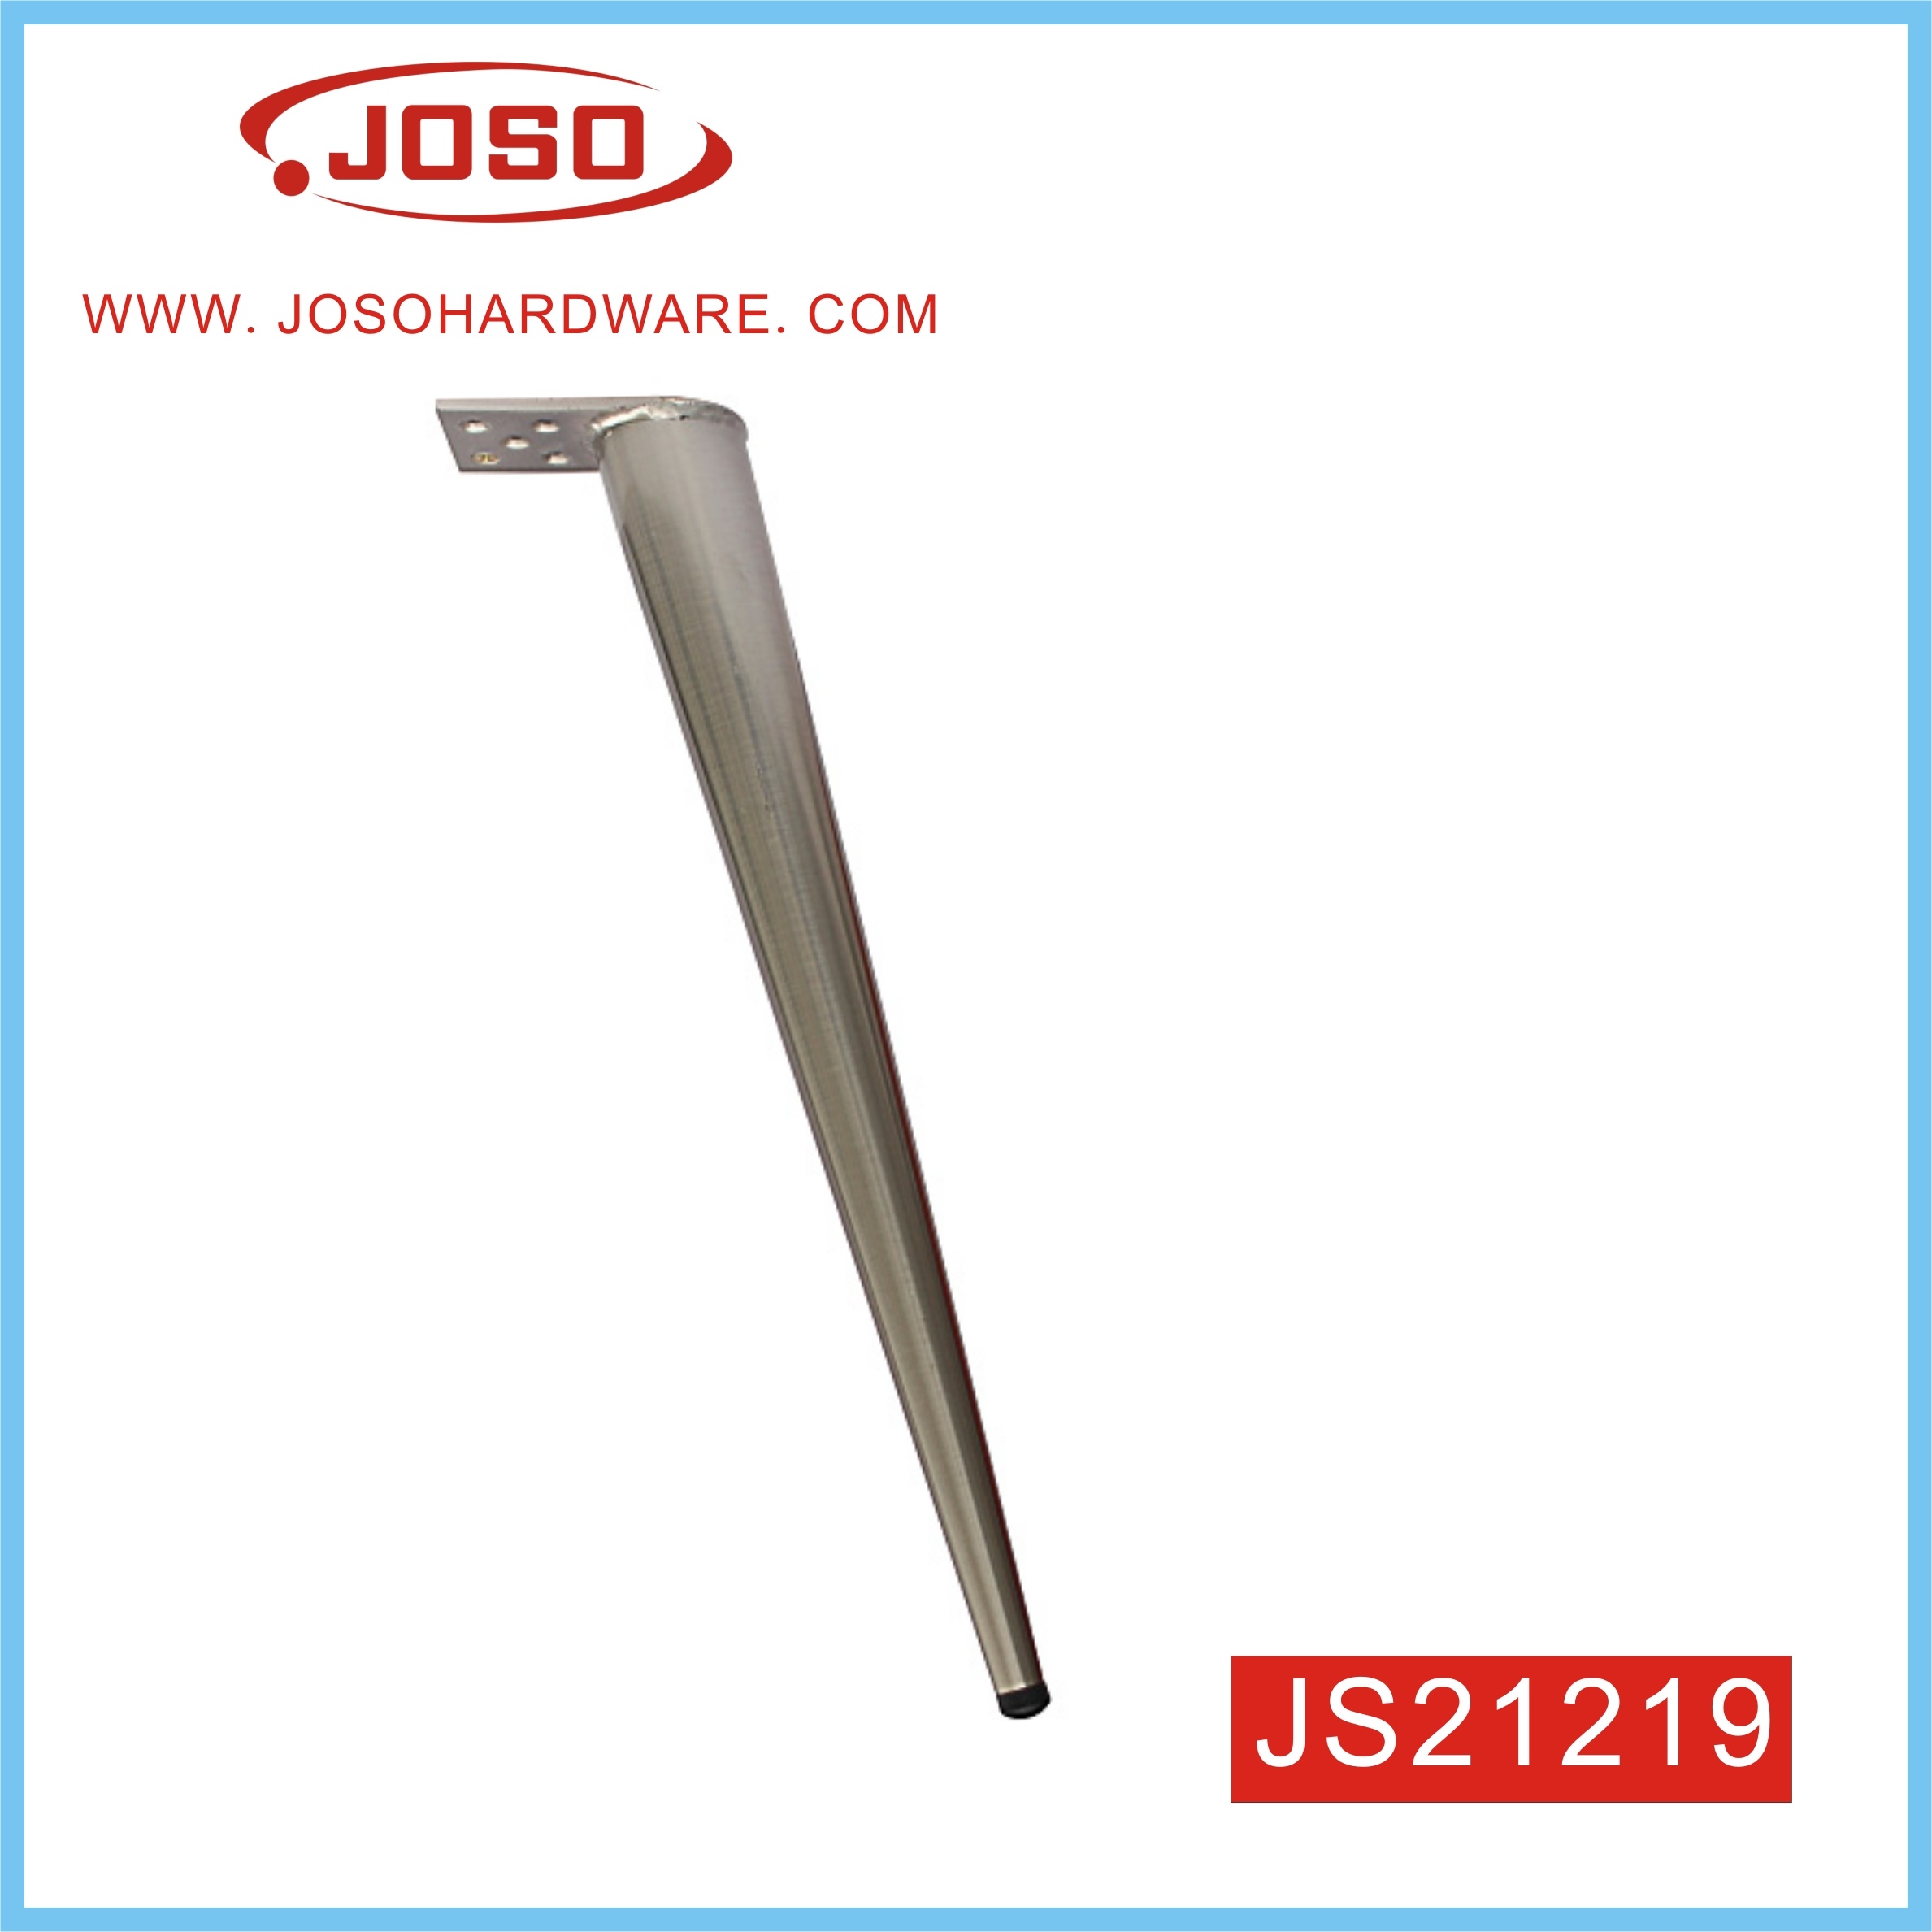 High Quality Tapered Furniture Leg for Table